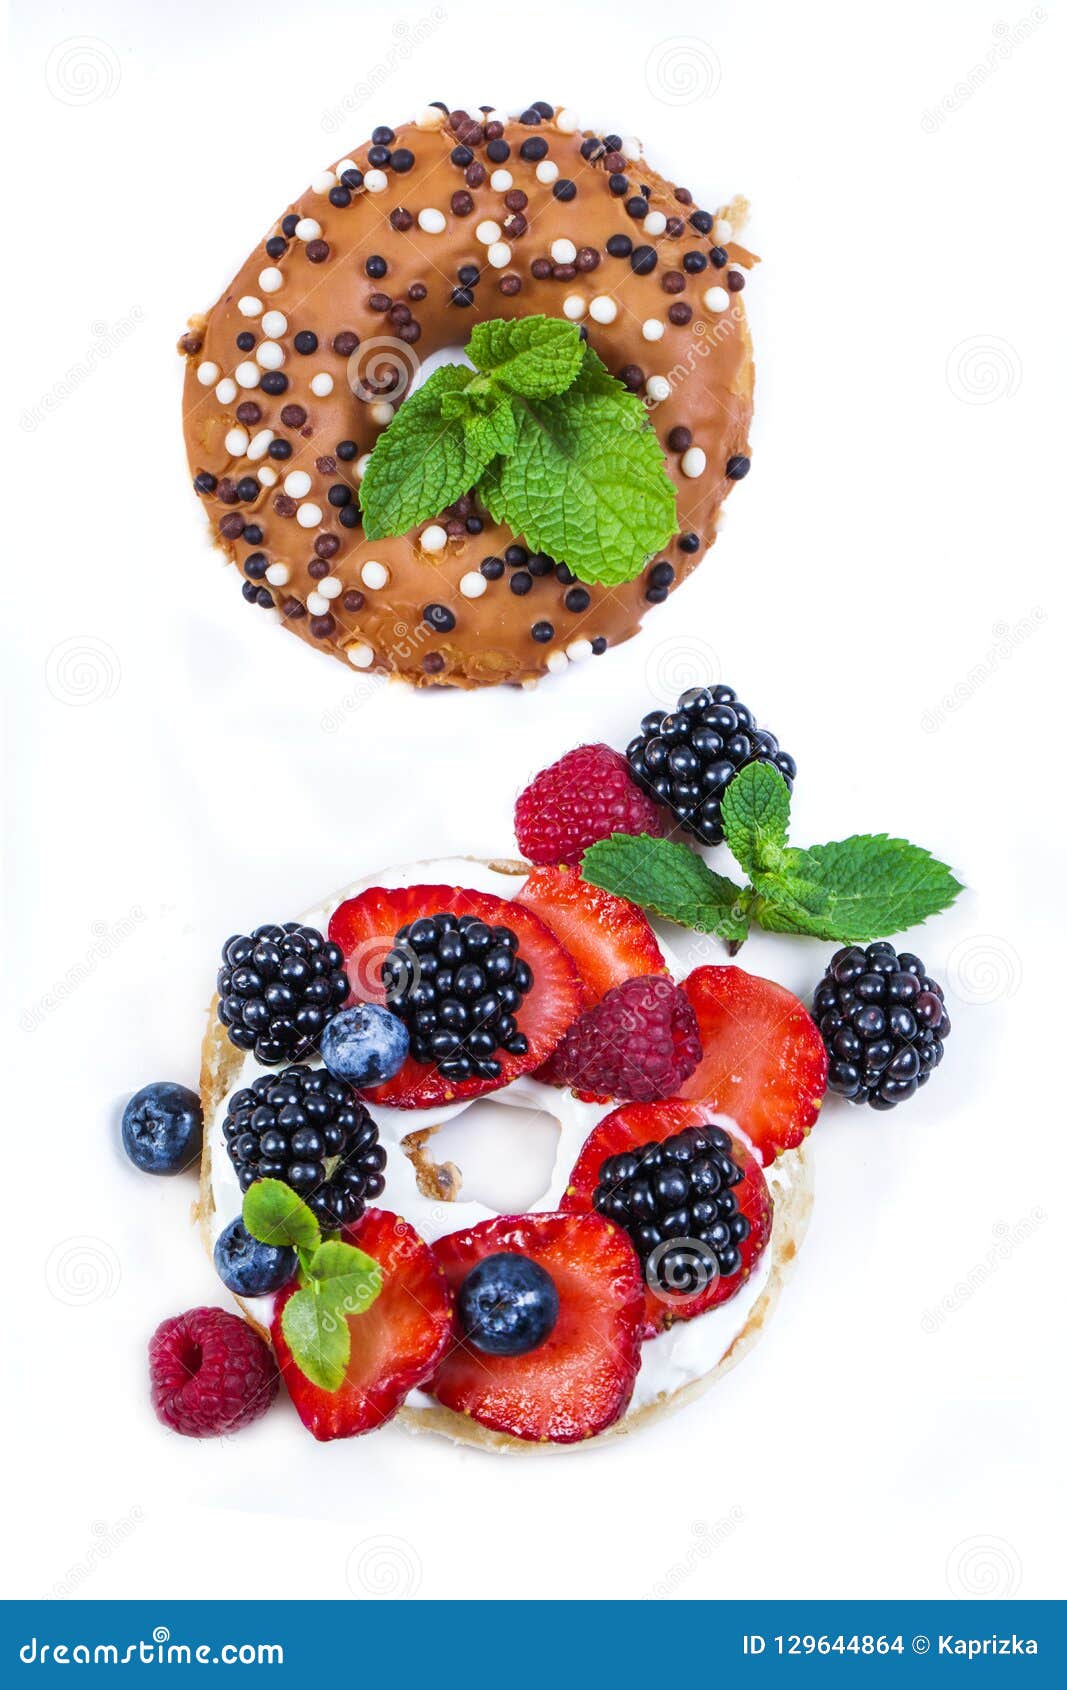 morning breakfast with mini donuts and berries on plate under po